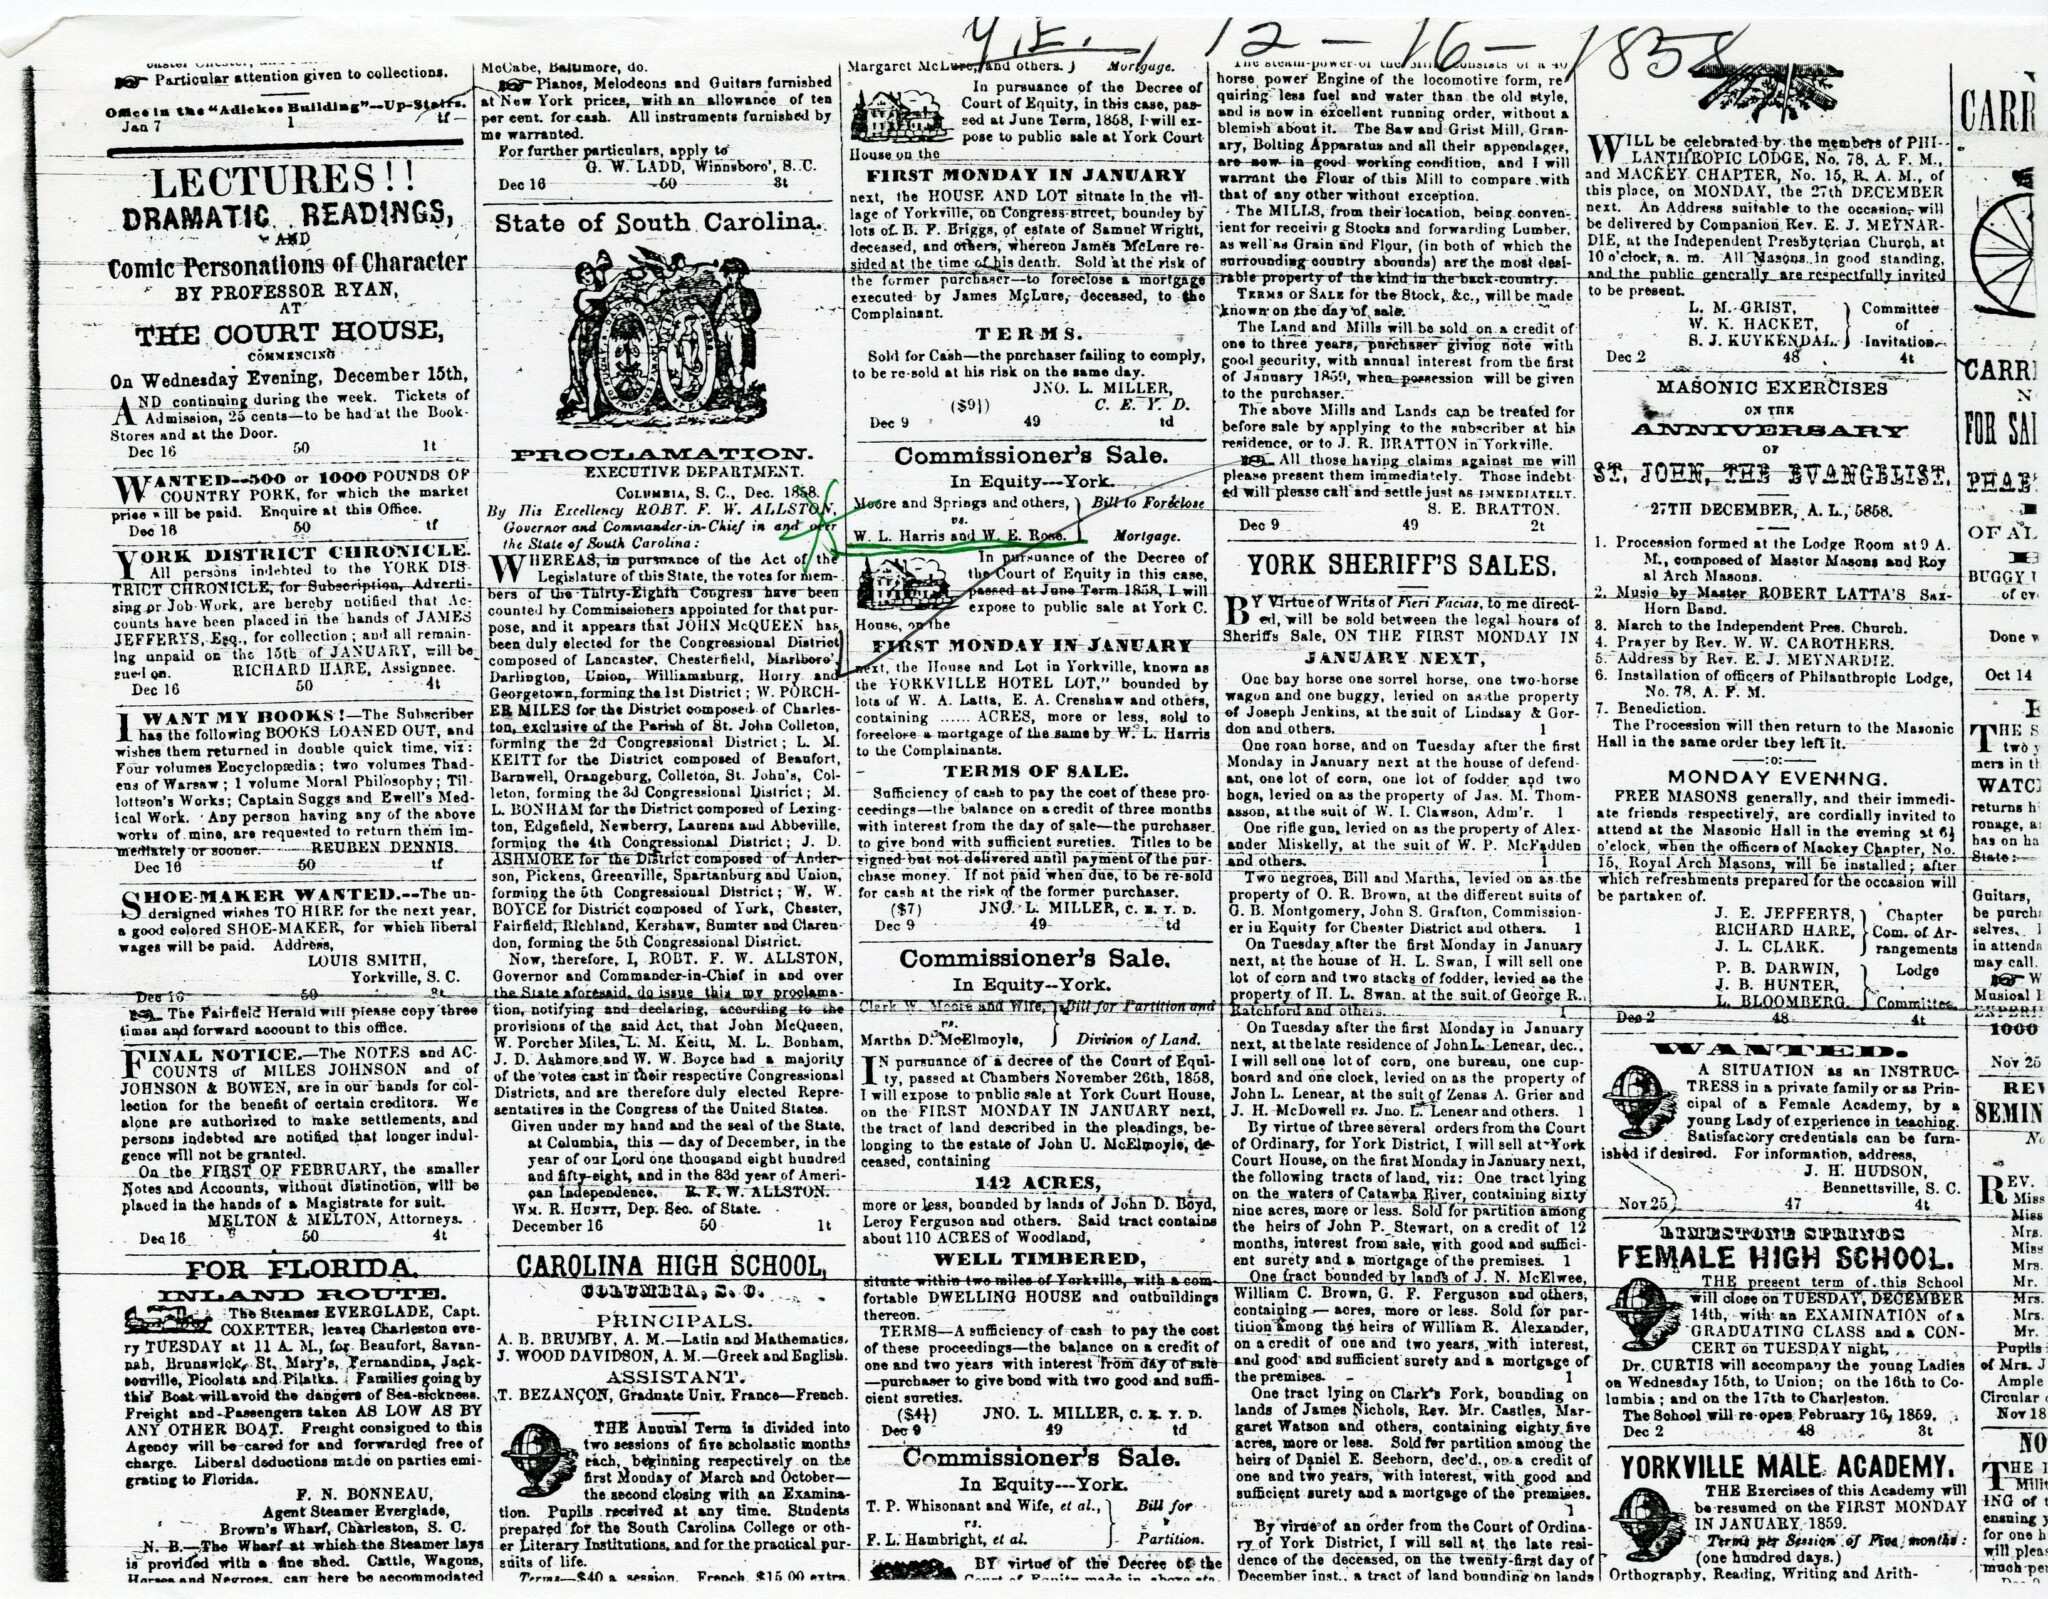 Legal Notice by Moore and Springs - 1858